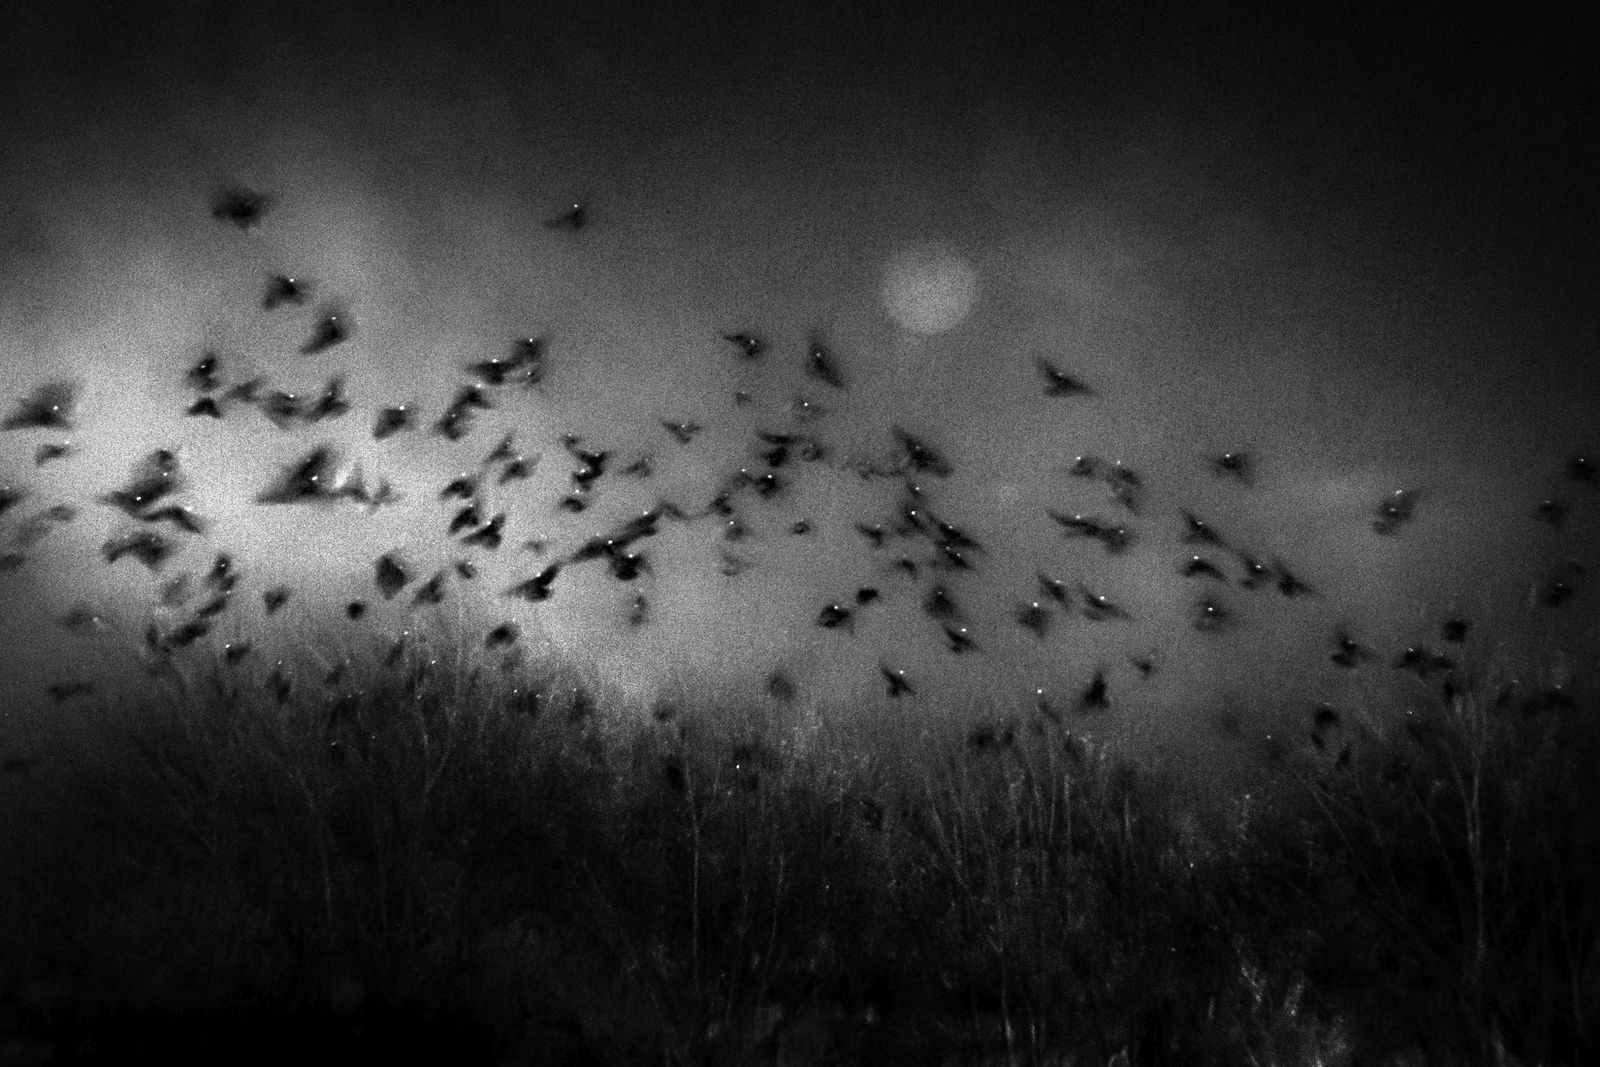 © Stavros Stamatiou - Image from the A raven's dream photography project